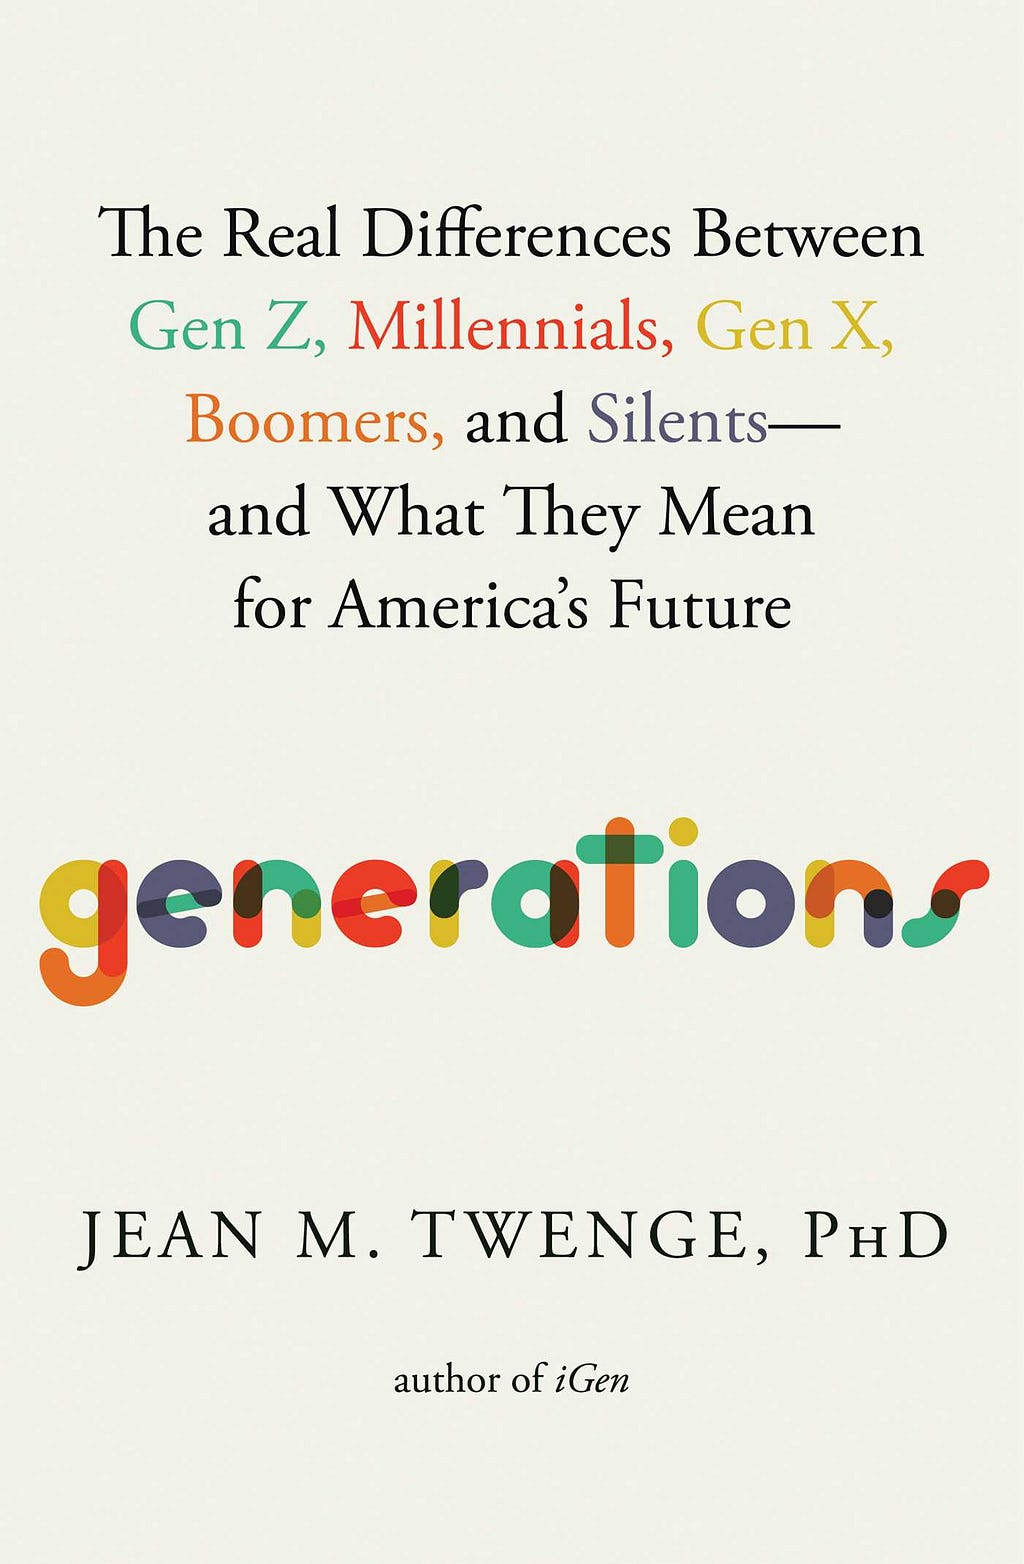 Generations: The Real Differences Between Gen Z, Millennials, Gen X, Boomers, and Silents―and What They Mean for America's Future E book